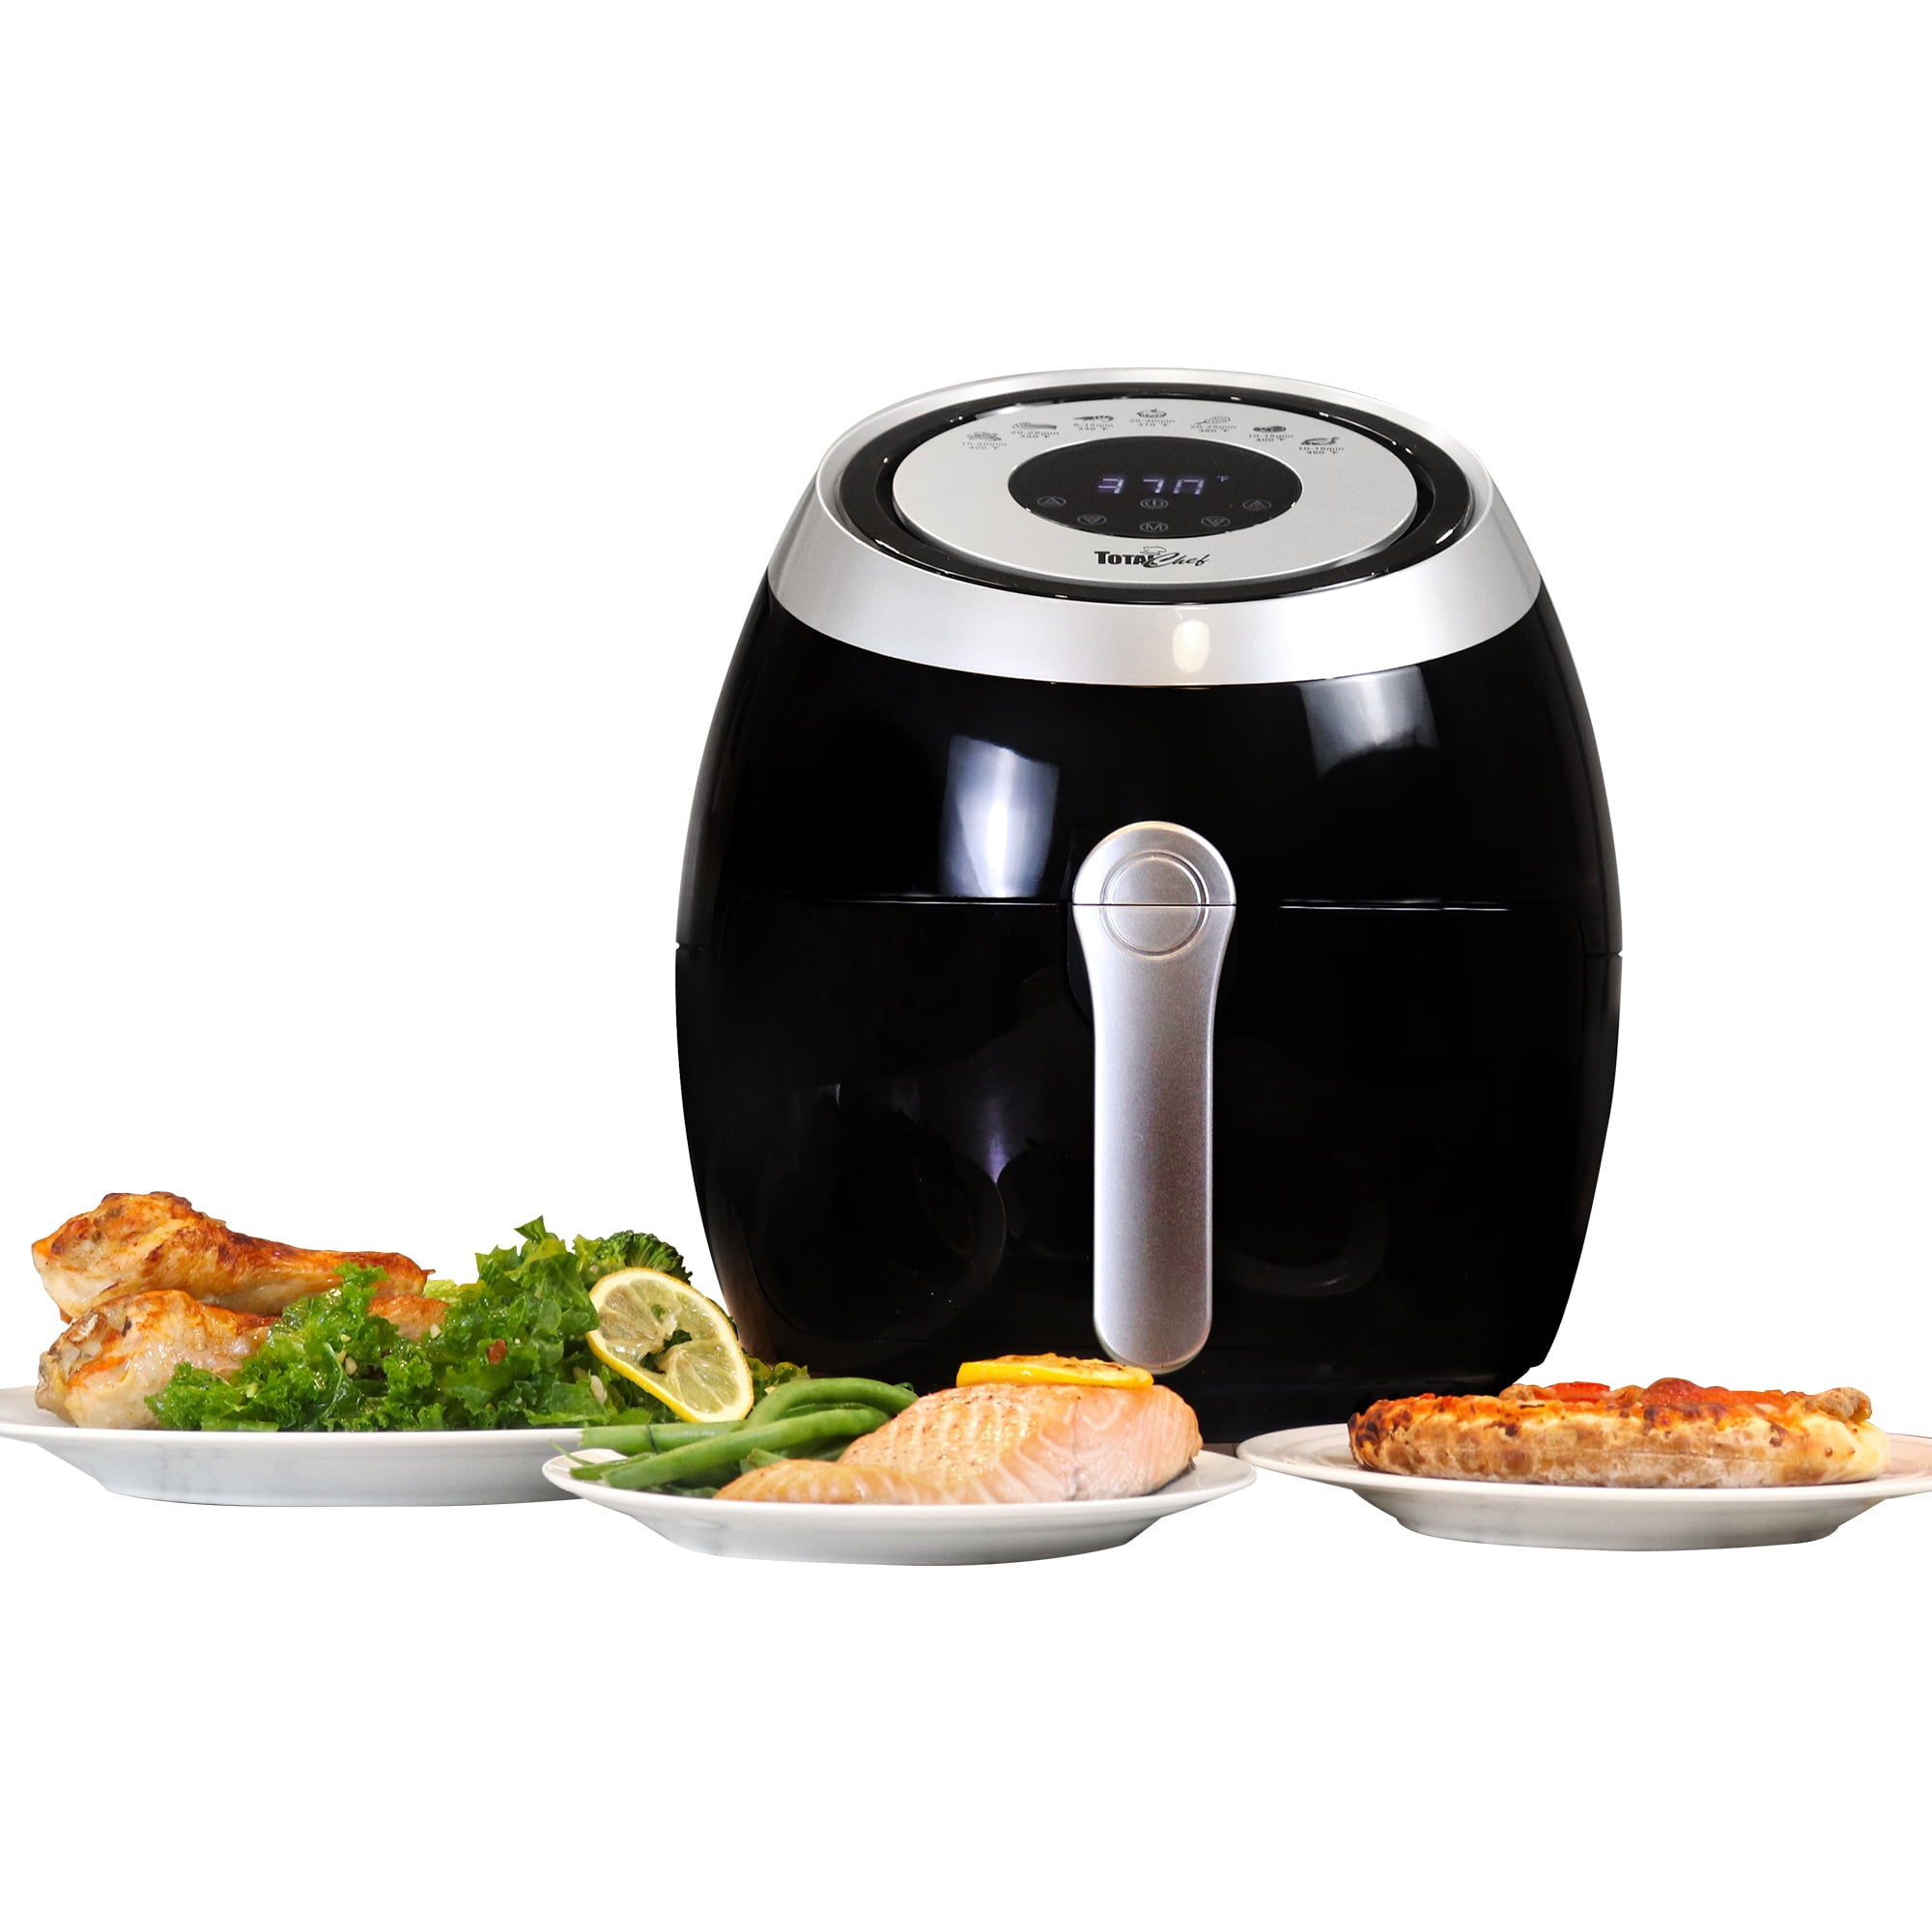 The Best Things to Cook in Air Fryer, According to Chefs